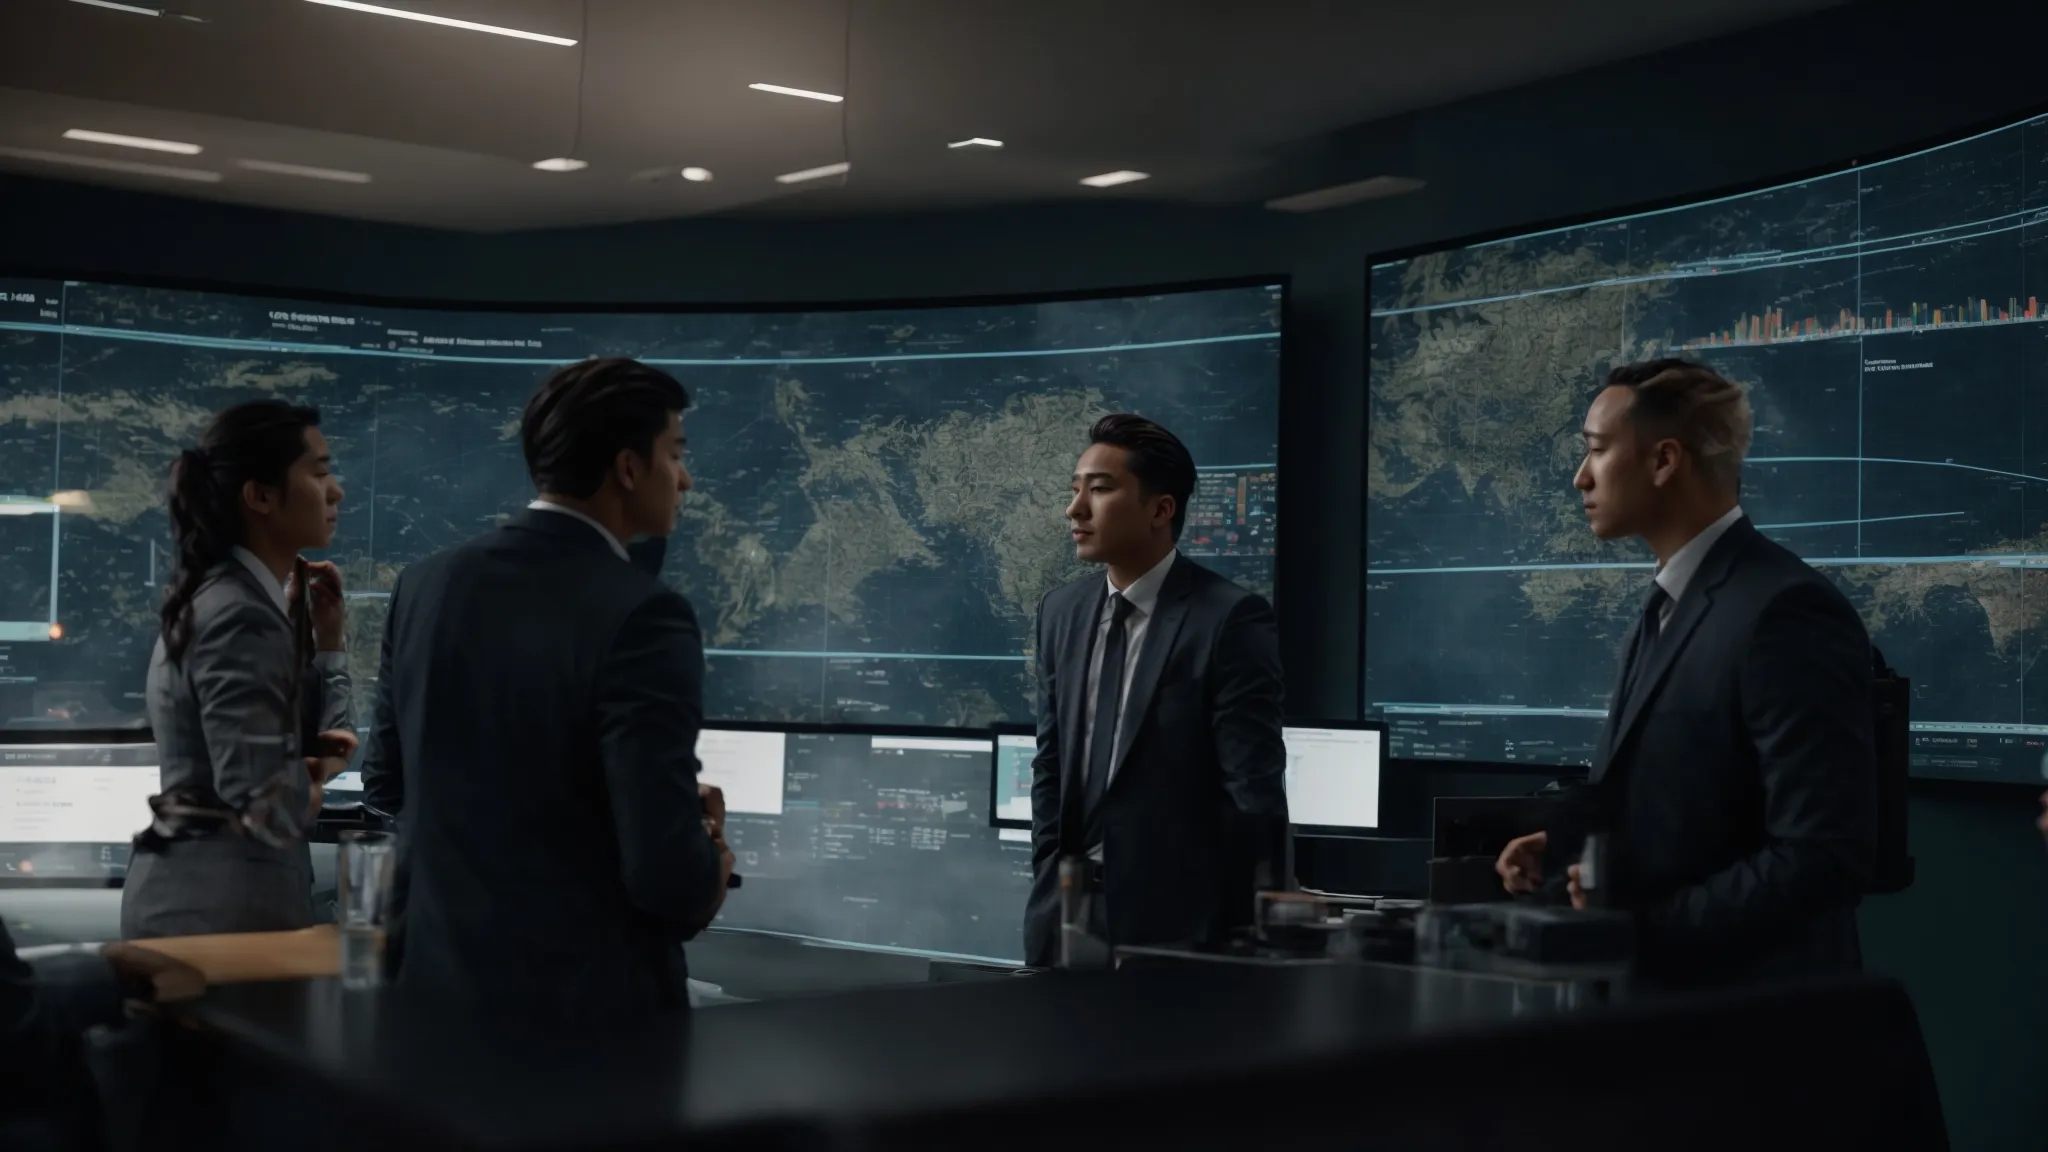 a group of professionals discussing over a large screen displaying a map with location markers and analytics graphs.